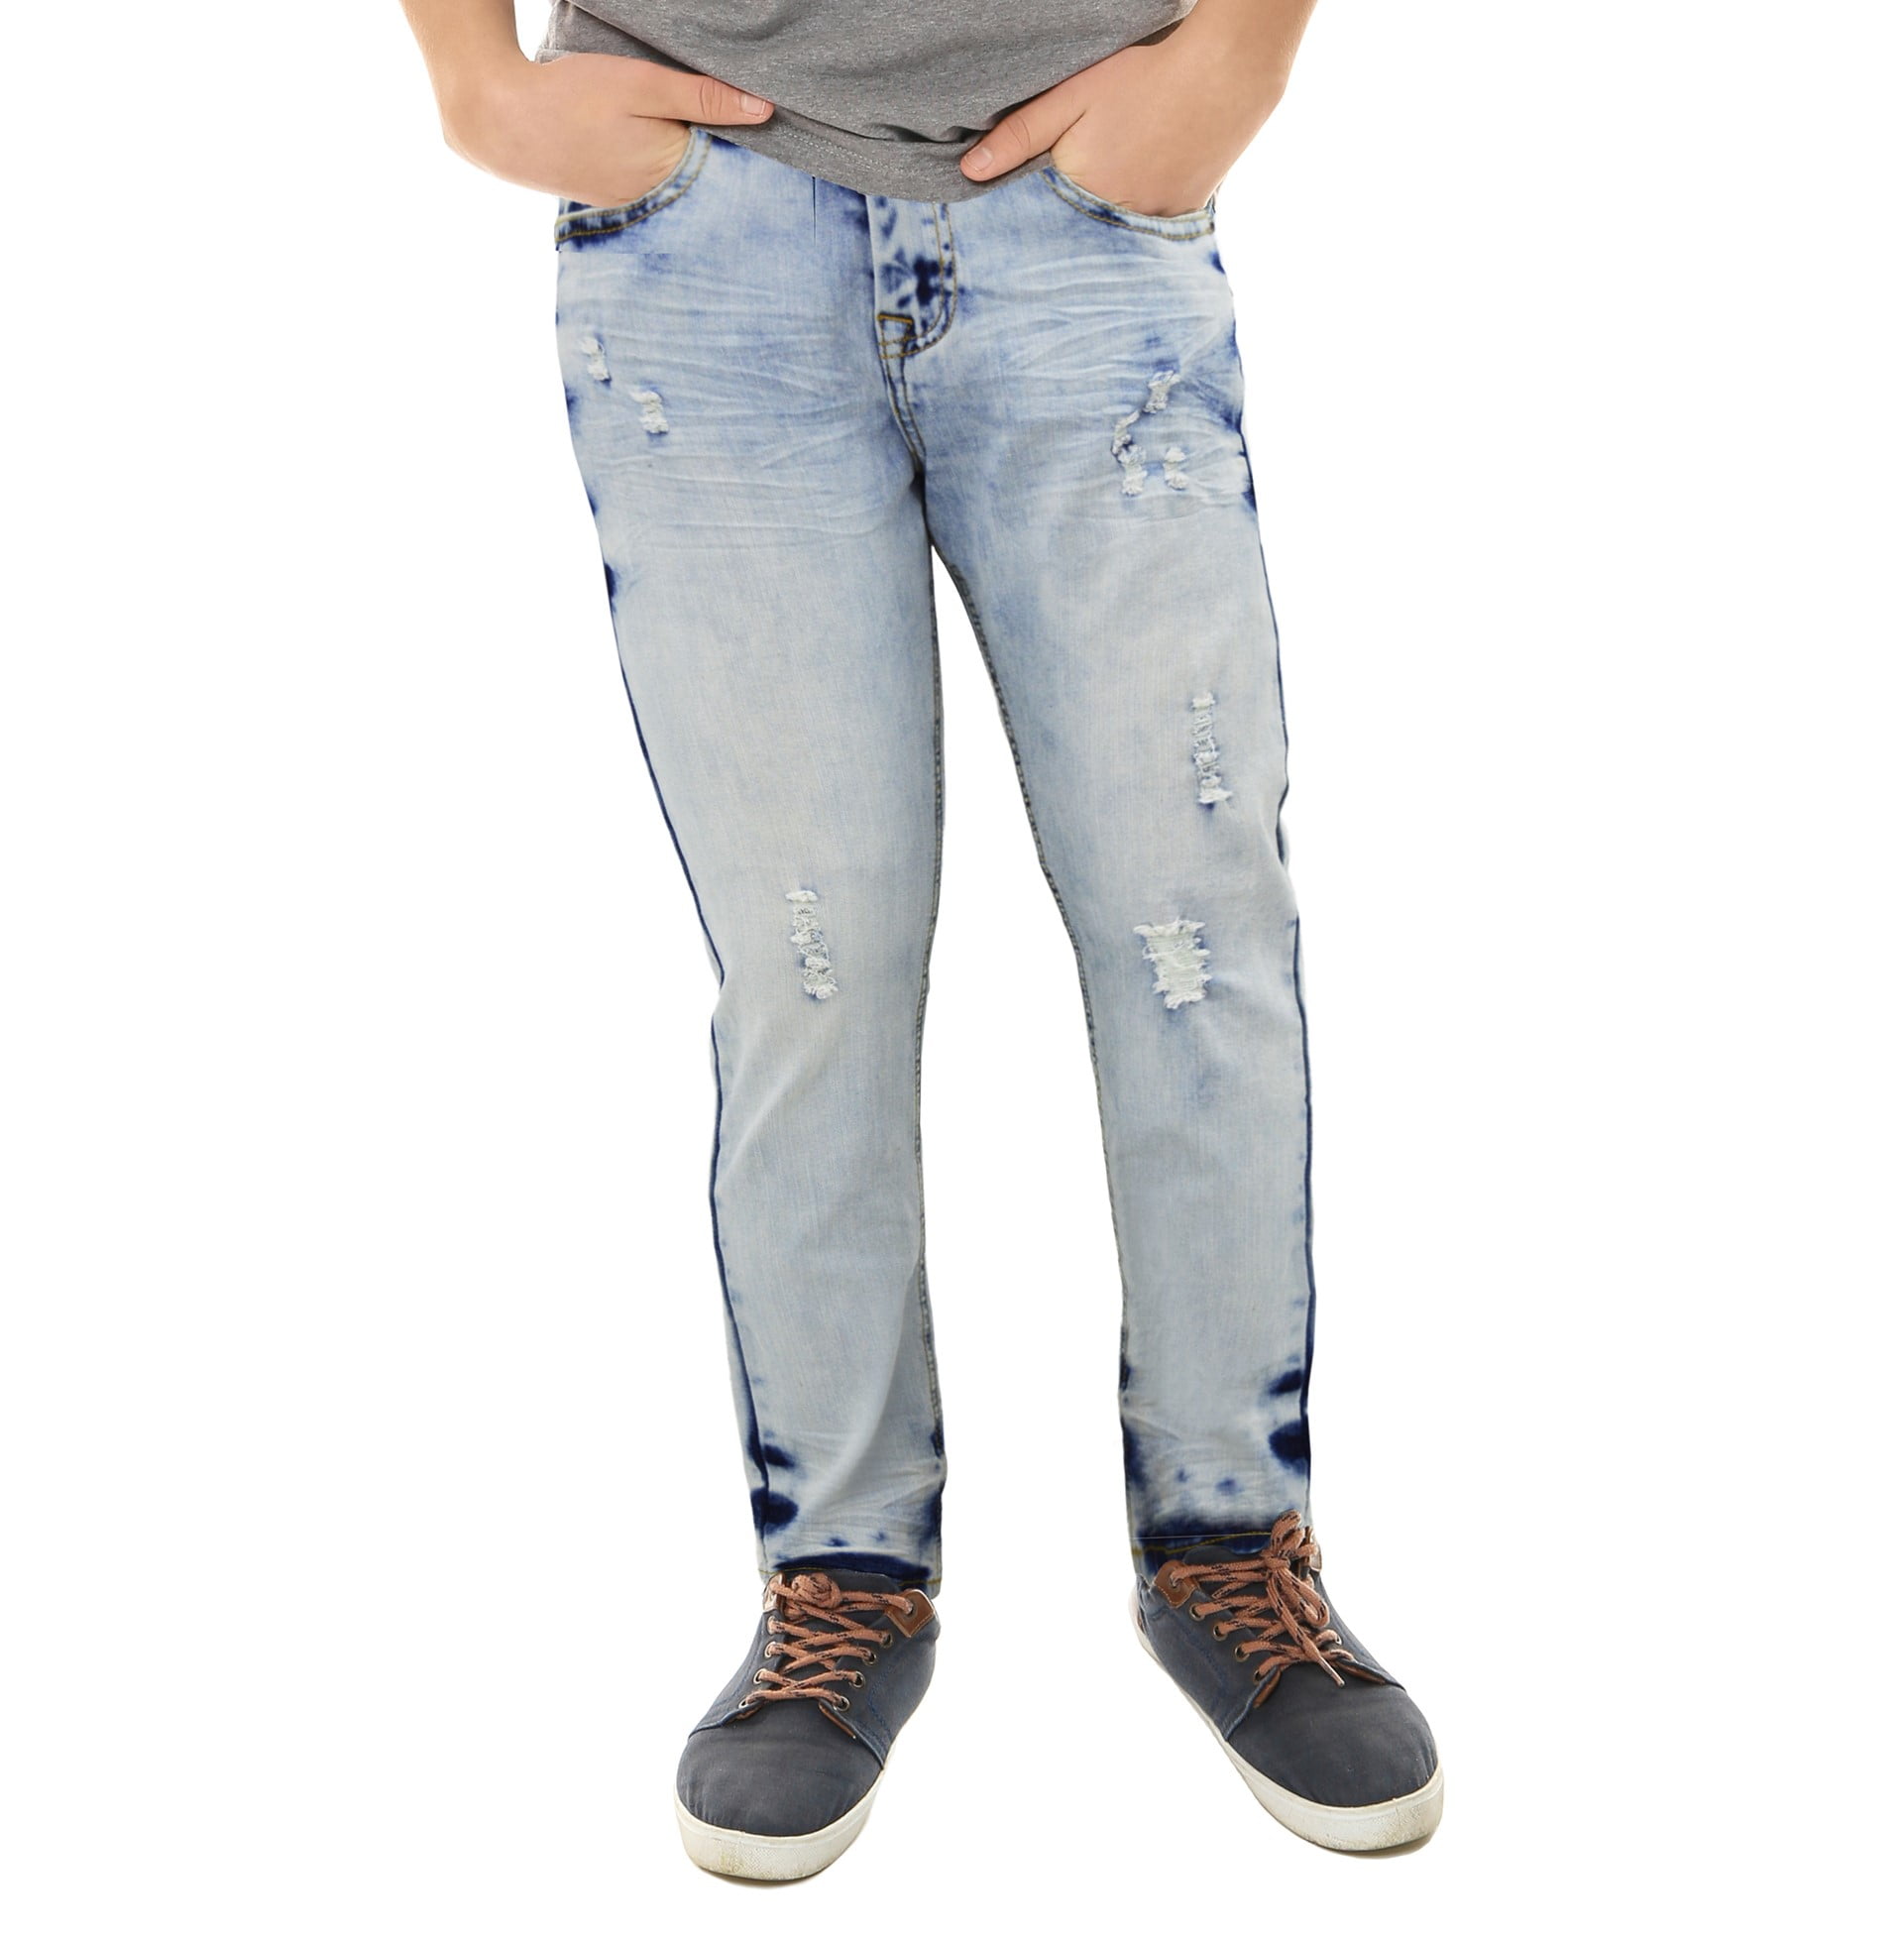 Buy Rikidoos Text Printed Denim Jeans Pant Navy Blue for Boys (2-3Years)  Online in India, Shop at FirstCry.com - 15482775